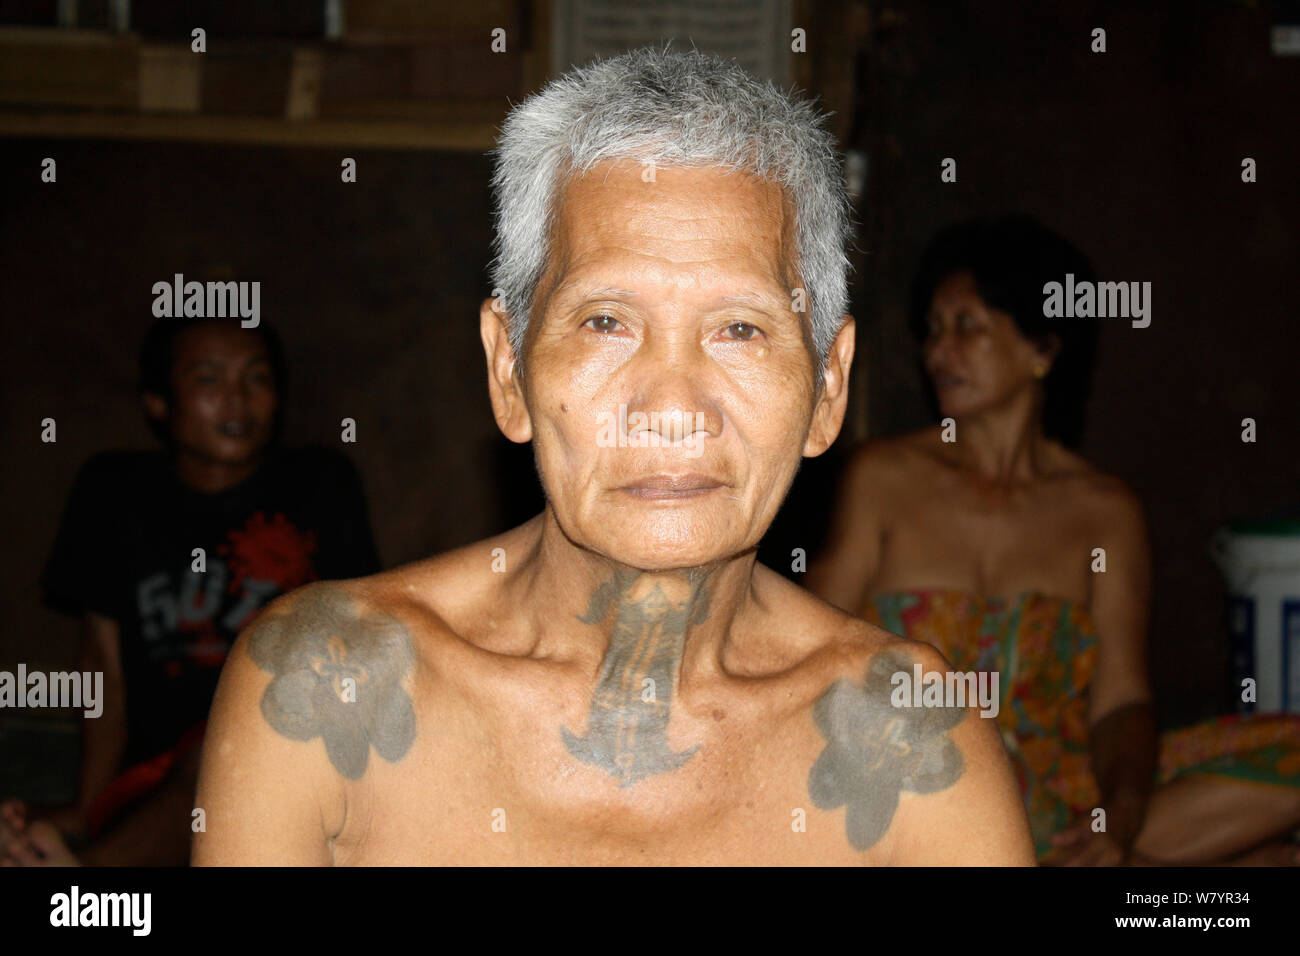 Pilgrim Tattoo Bali  90mins Tri Hita Karana is a traditional philosophy  for life on the island of Bali Indonesia The literal translation is  roughly the three causes of wellbeing or three